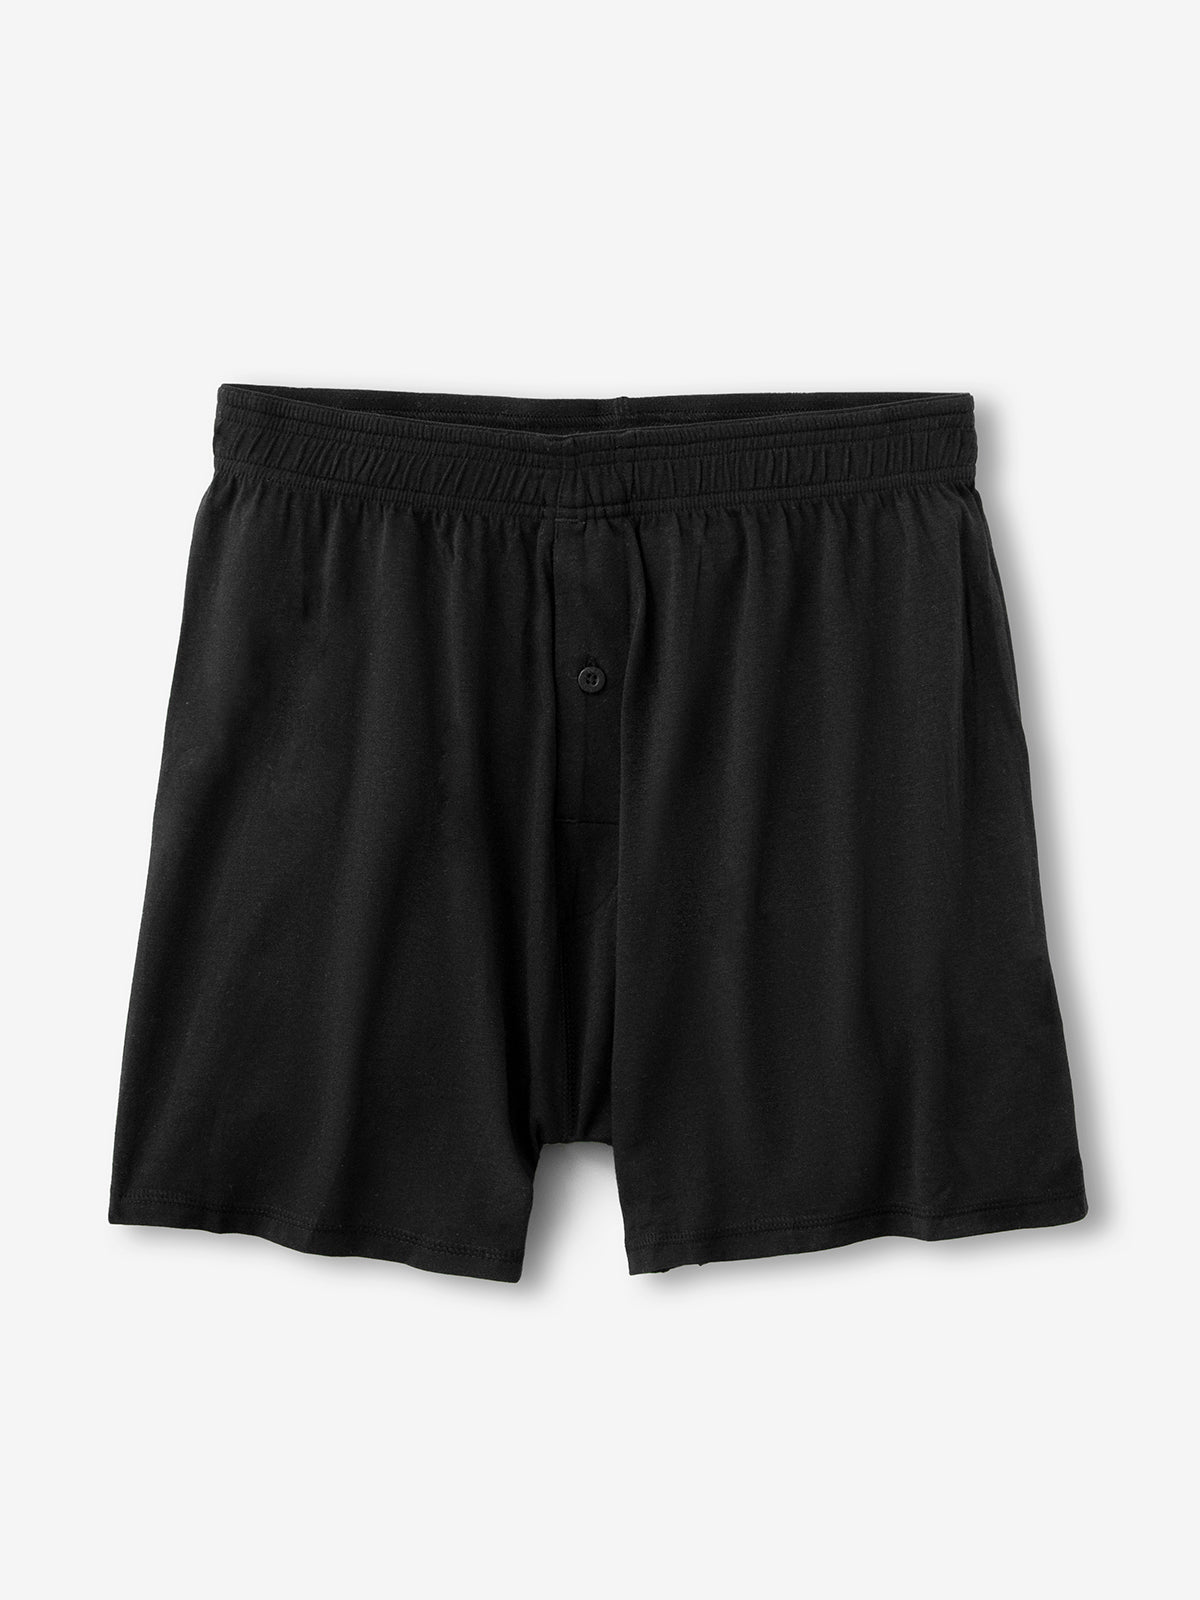 Oversized Loose Cotton Underwear for Men Comfortable and Lightweight Briefs